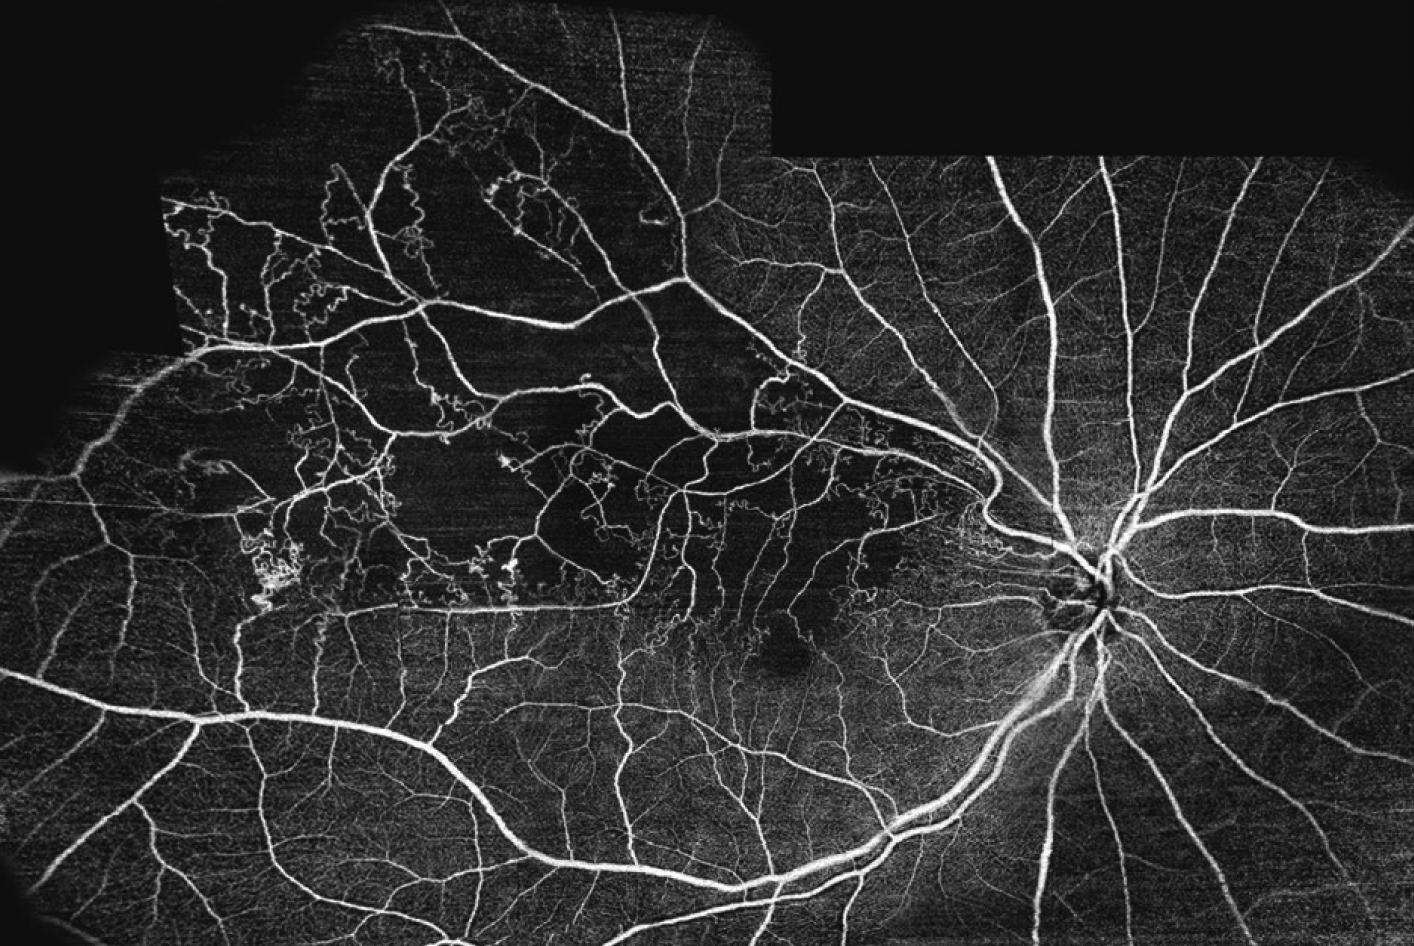 A new study published in the journal Eye quantifies the substantial incidence of a glaucoma diagnosis in patients who previously experienced a retinal vein occlusion. Researchers found that screening tests to confirm open-angle glaucoma were often performed well after the initial RVO diagnosis, or not performed at all, illuminating the risks involved with this delay in care including retinal nerve fiber layer thinning and visual field loss.